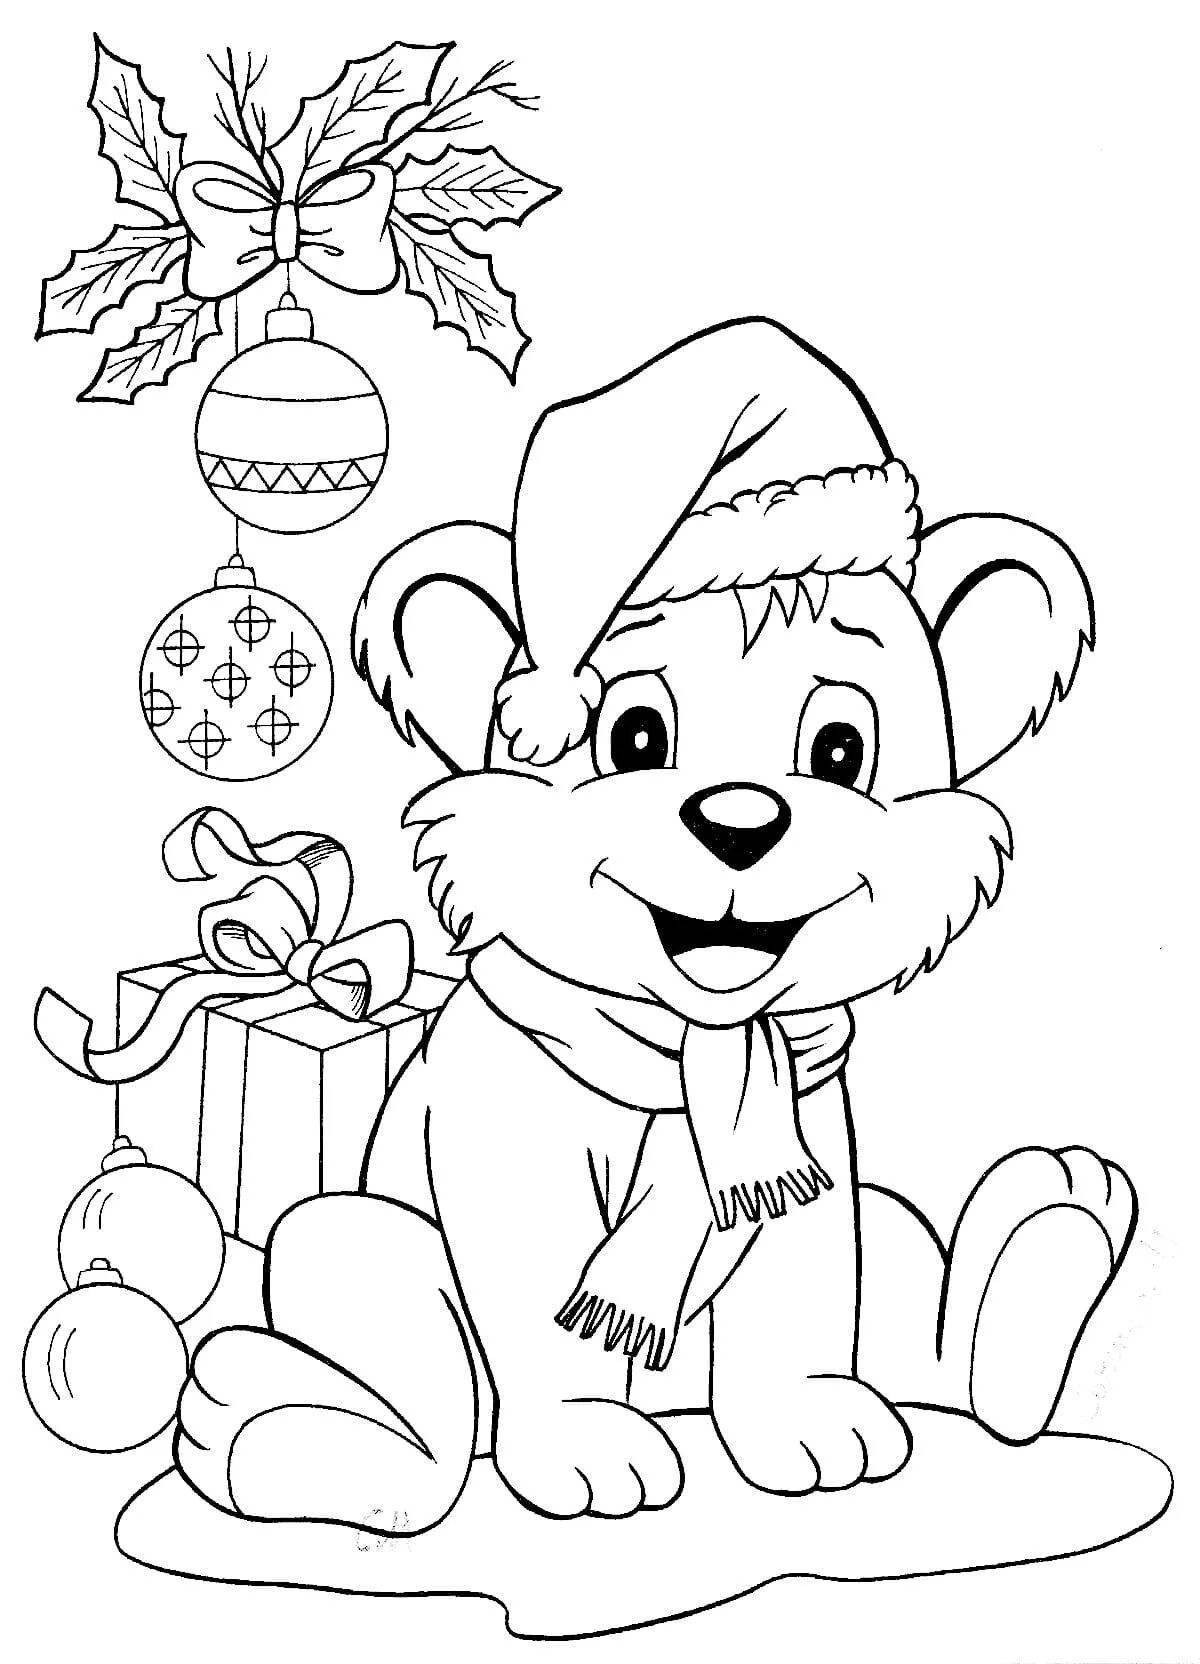 Joyful new coloring pages